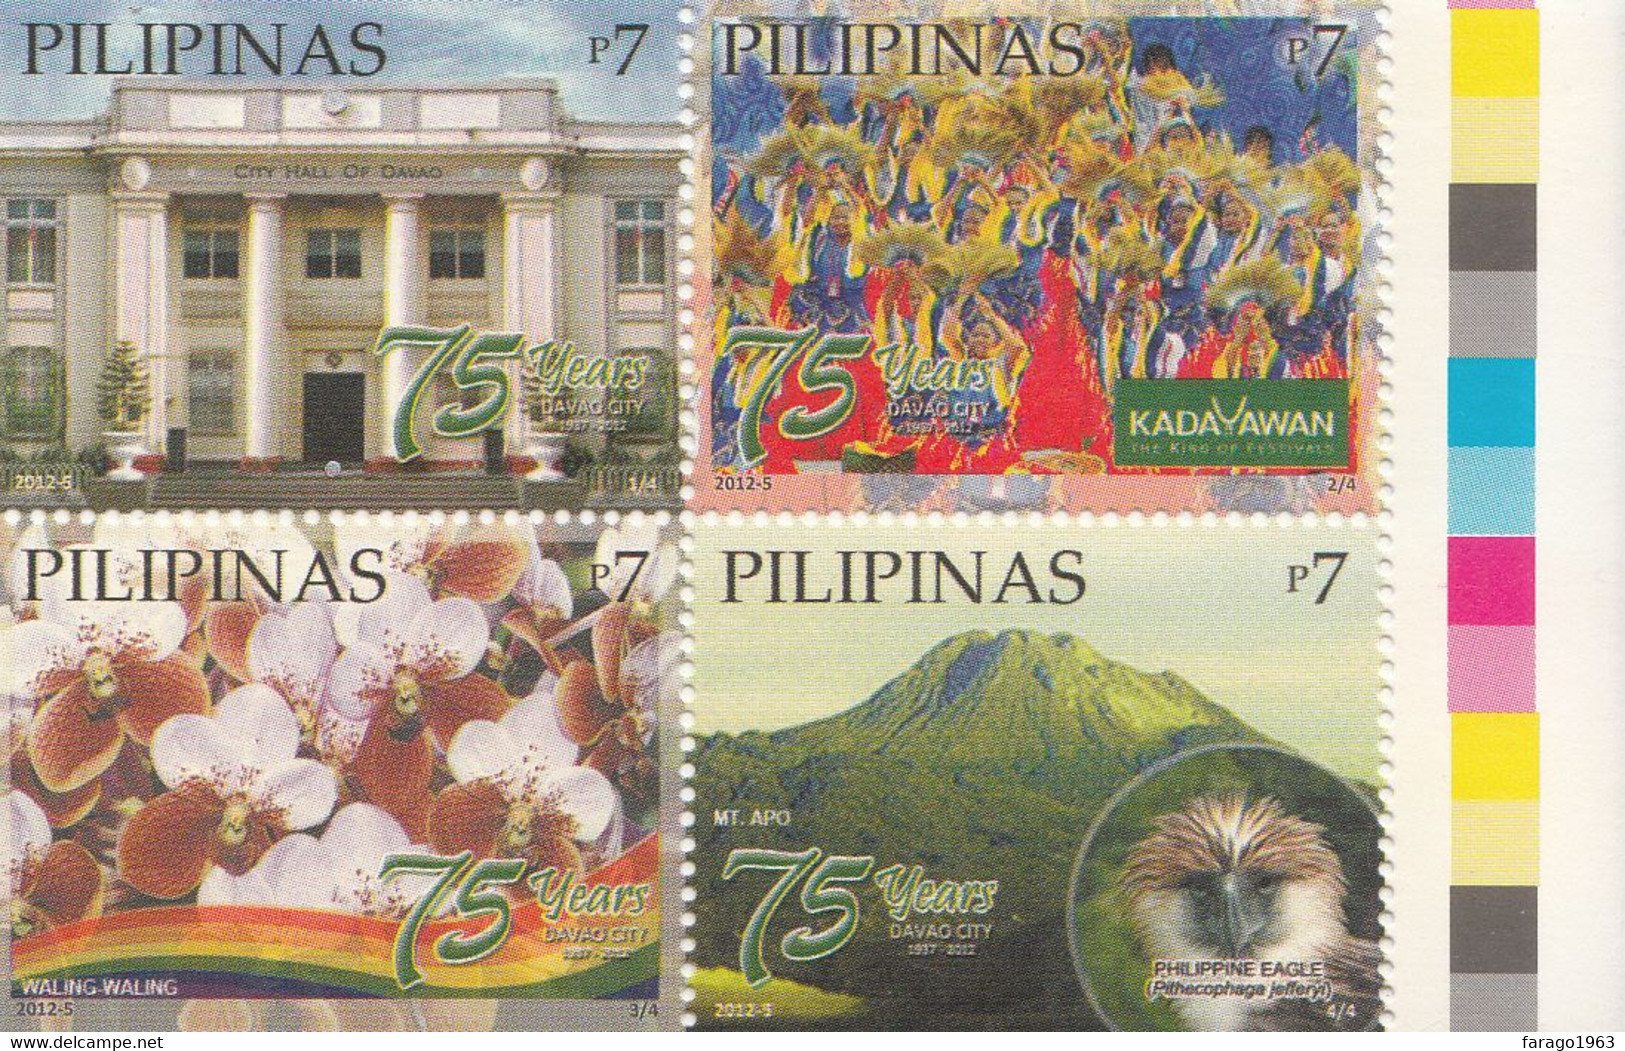 2012 Philippines Davao Orchids Mountains Eagle Birds Complete Block Of 4 MNH - Filippine